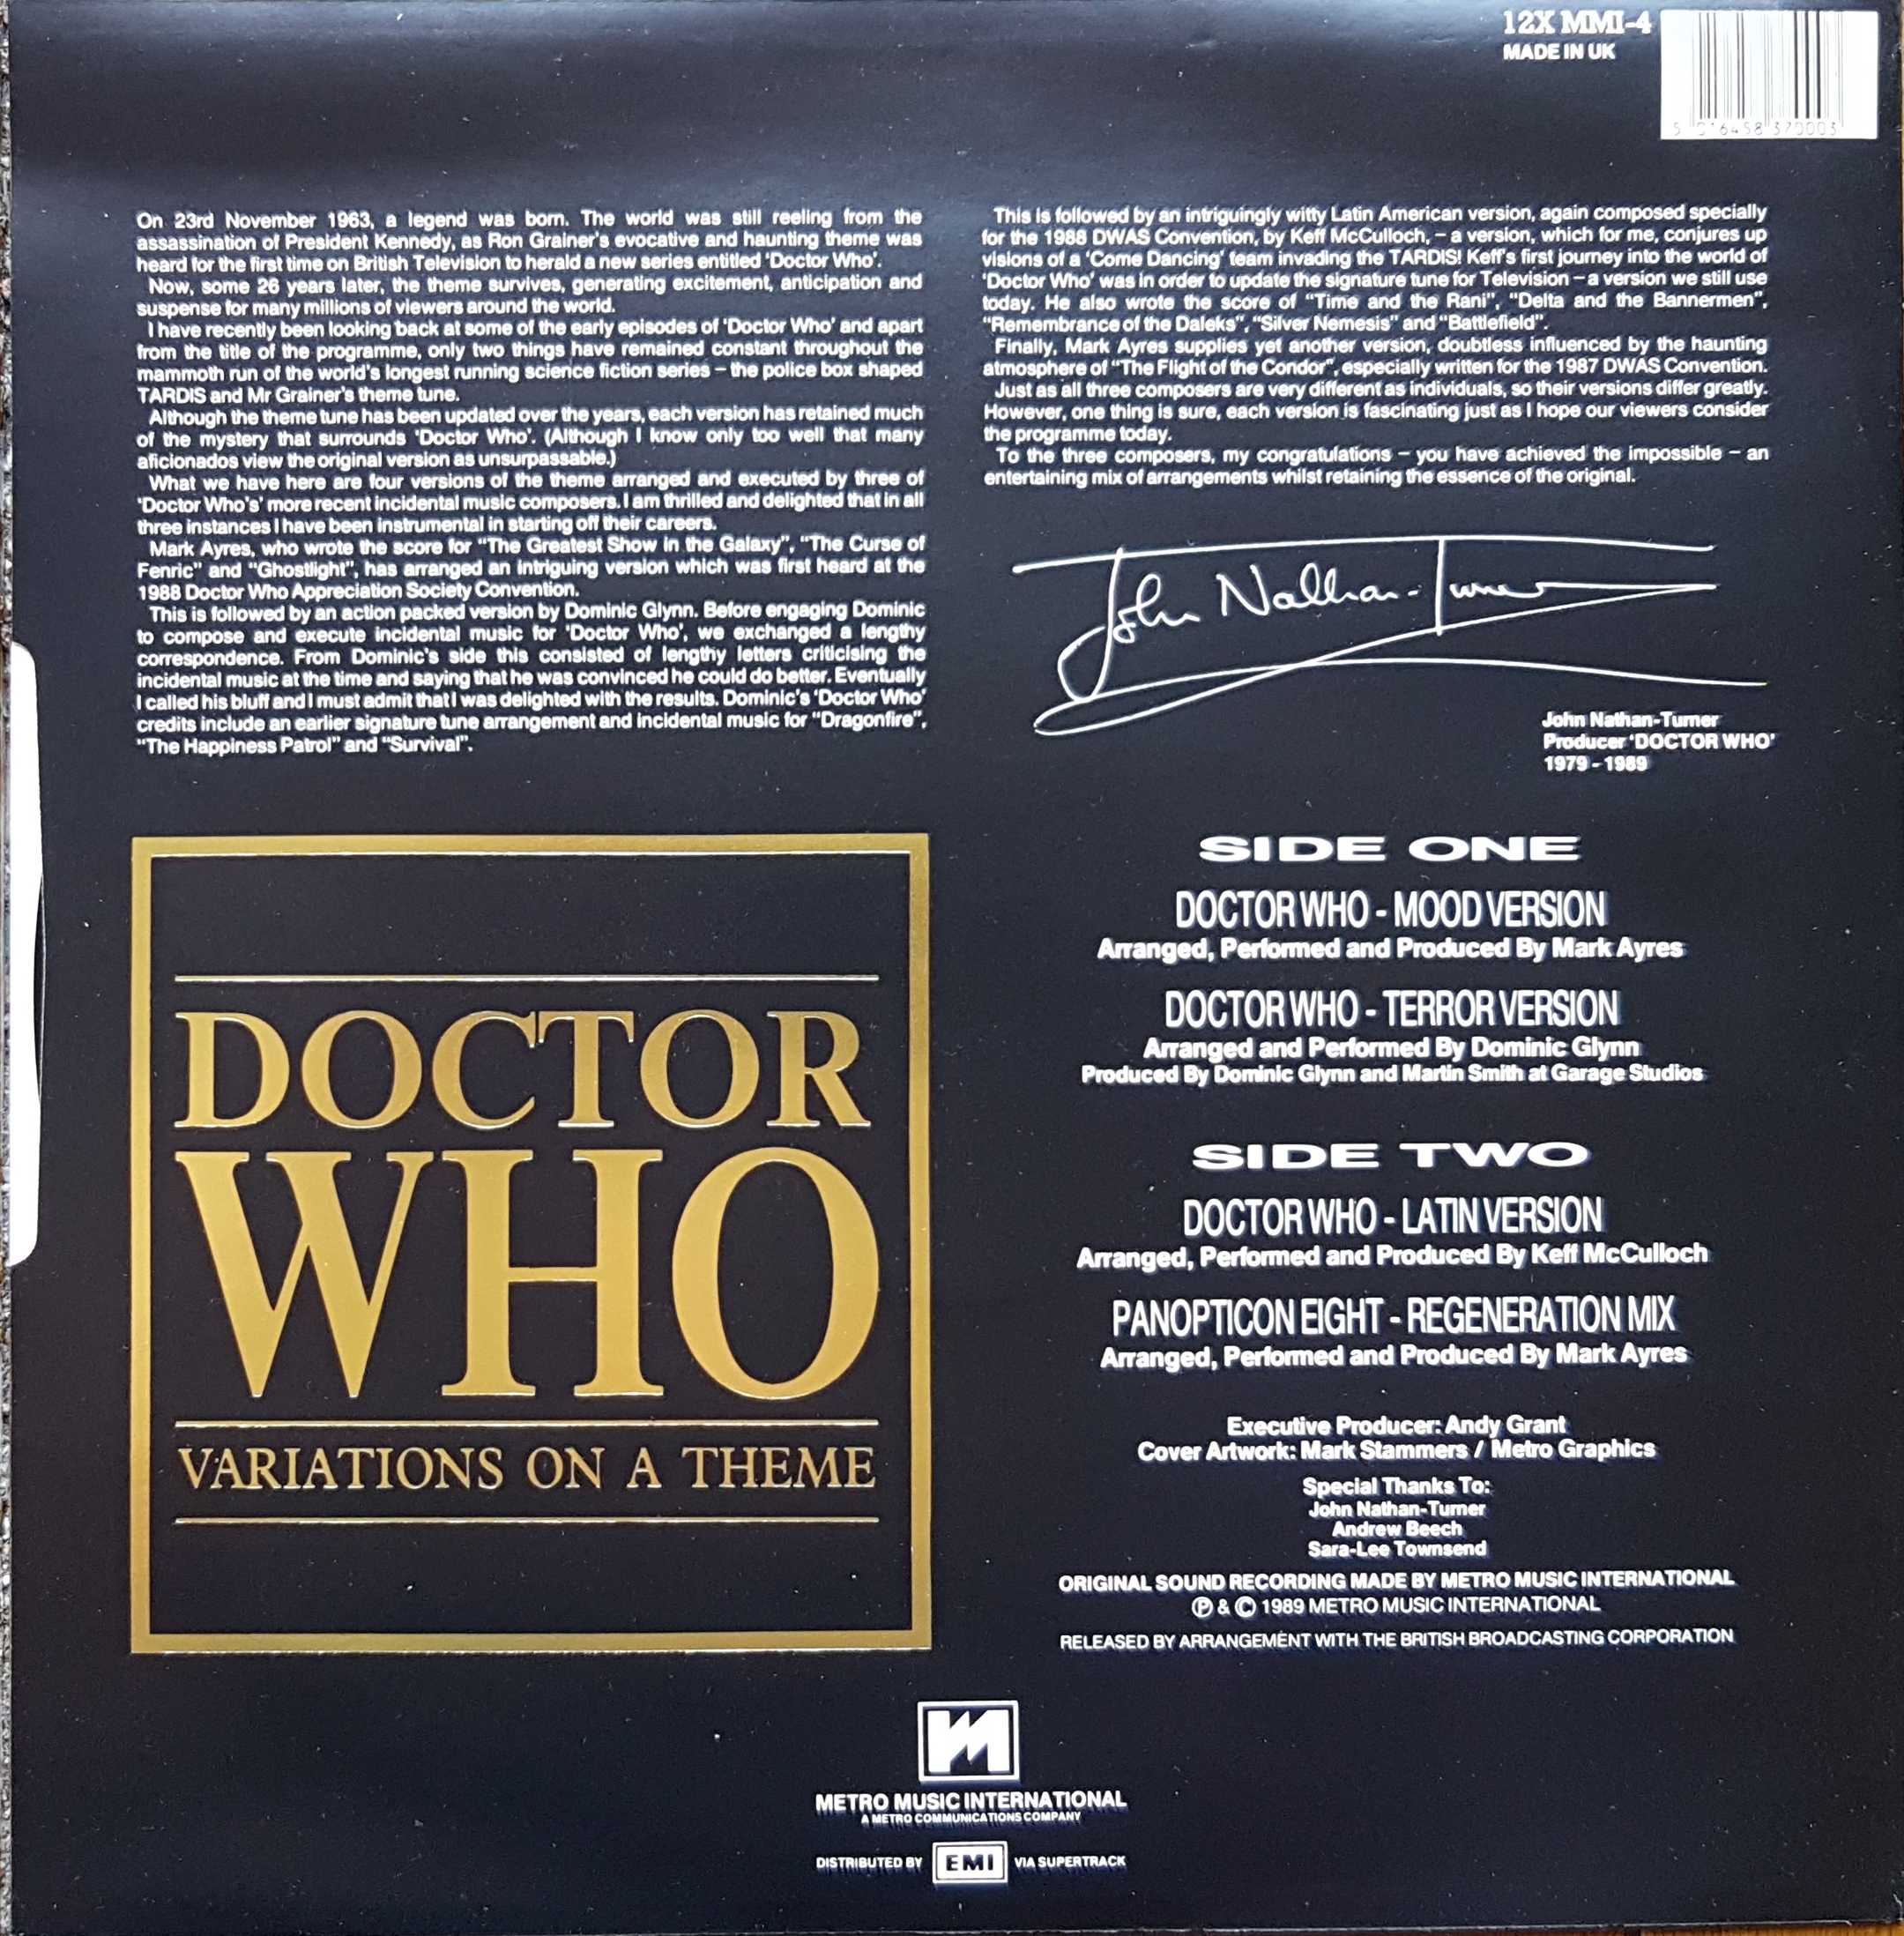 Picture of 12X MMI-4 Doctor Who - Variations on a theme by artist Ron Grainer from the BBC records and Tapes library